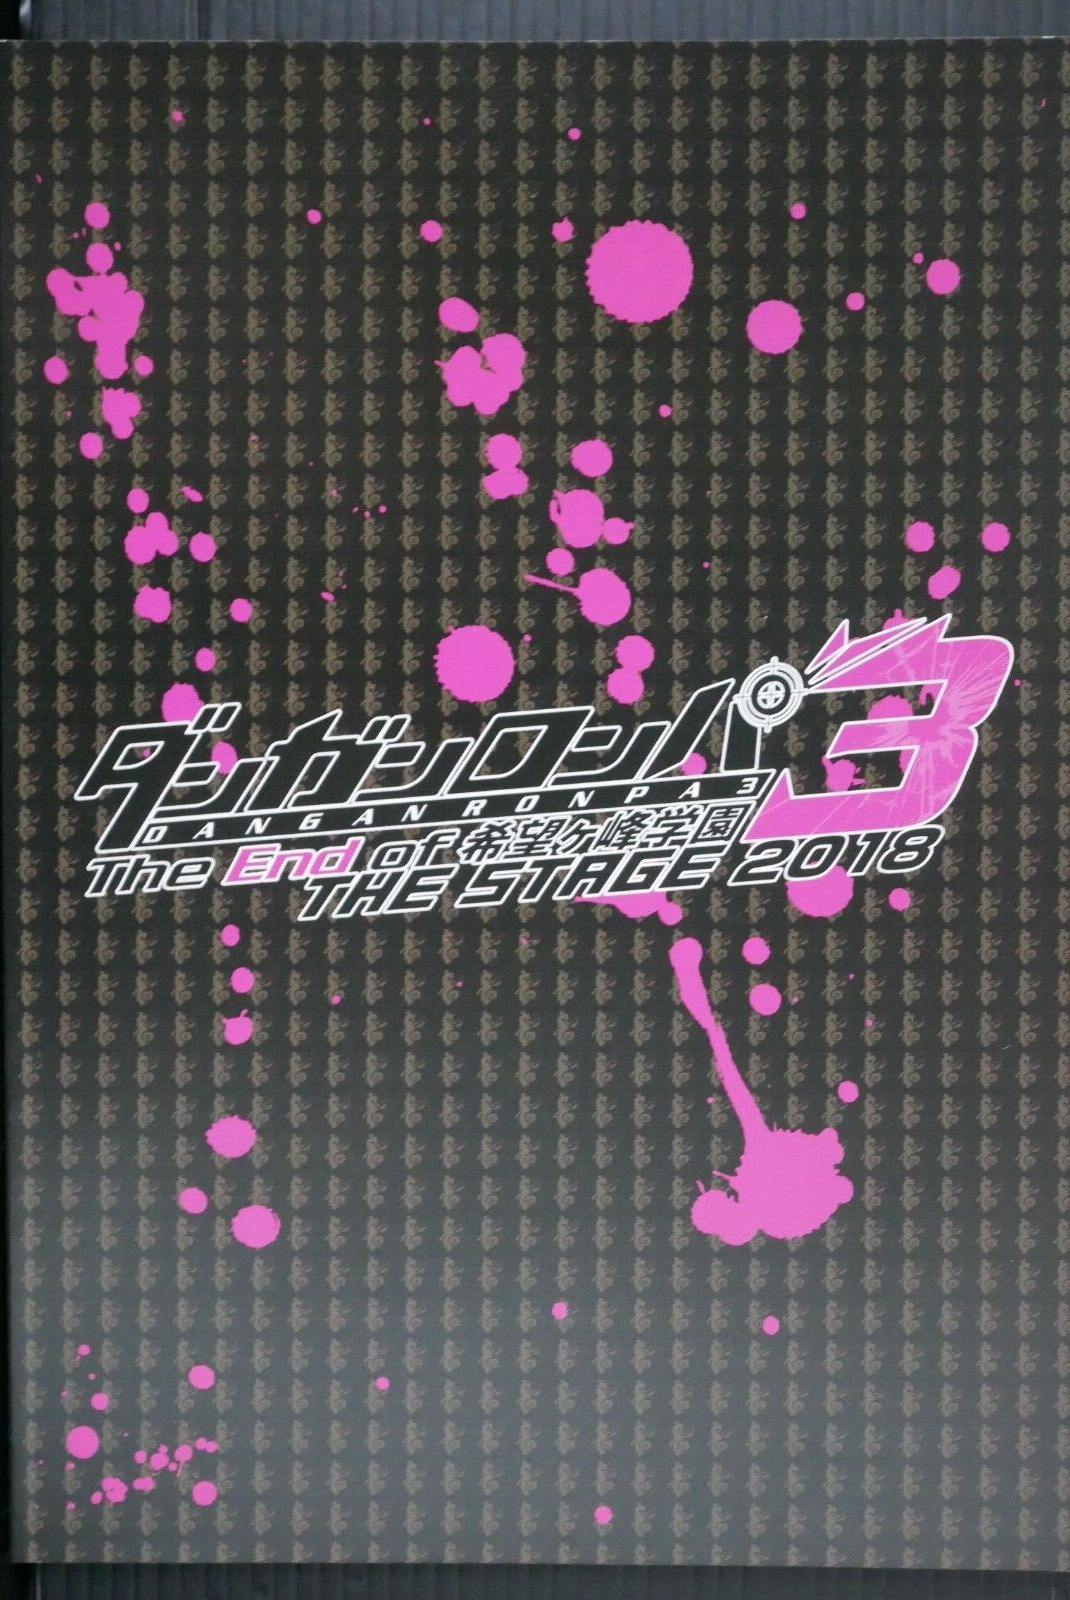 JAPAN Danganronpa 3 The Stage 2018 The Enf of Kibogamine Academy Pamphlet